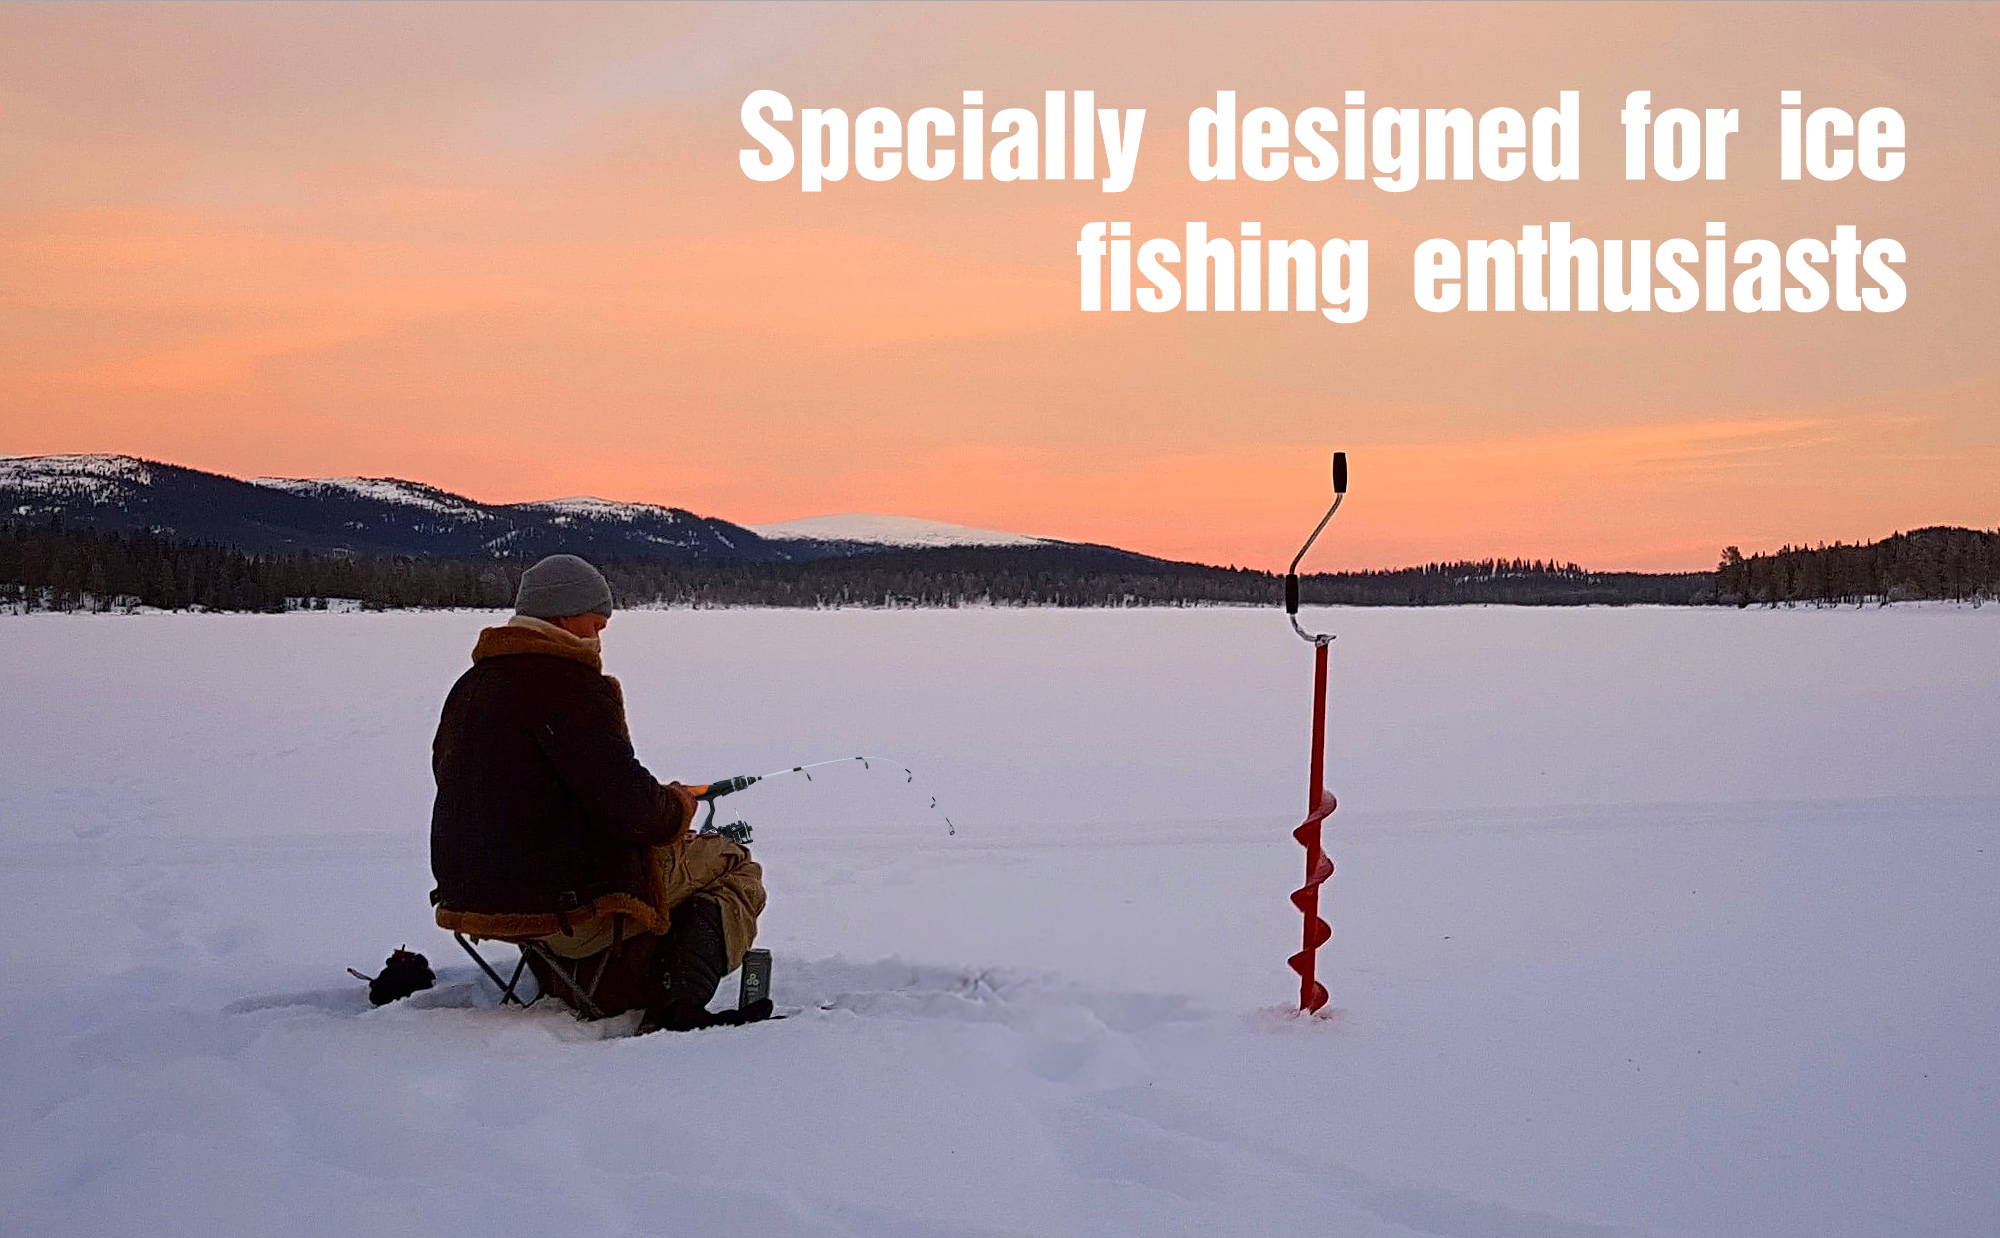 A man fishes on a frozen lake using a Tuxedo Sailor intermediate ice fishing rod.